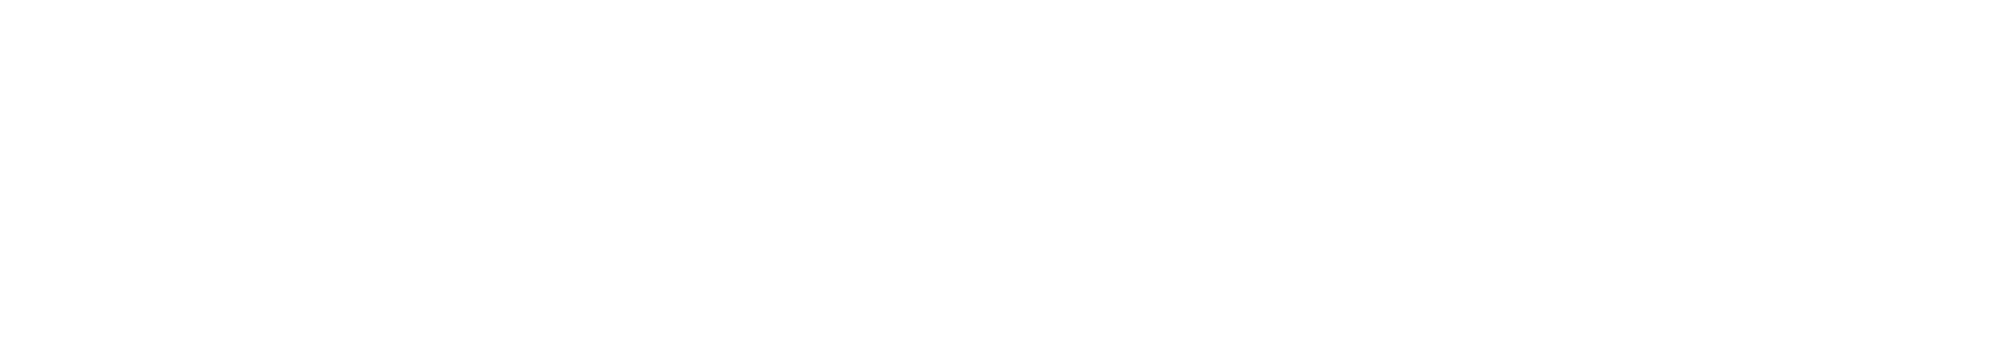 spaceconnect logo